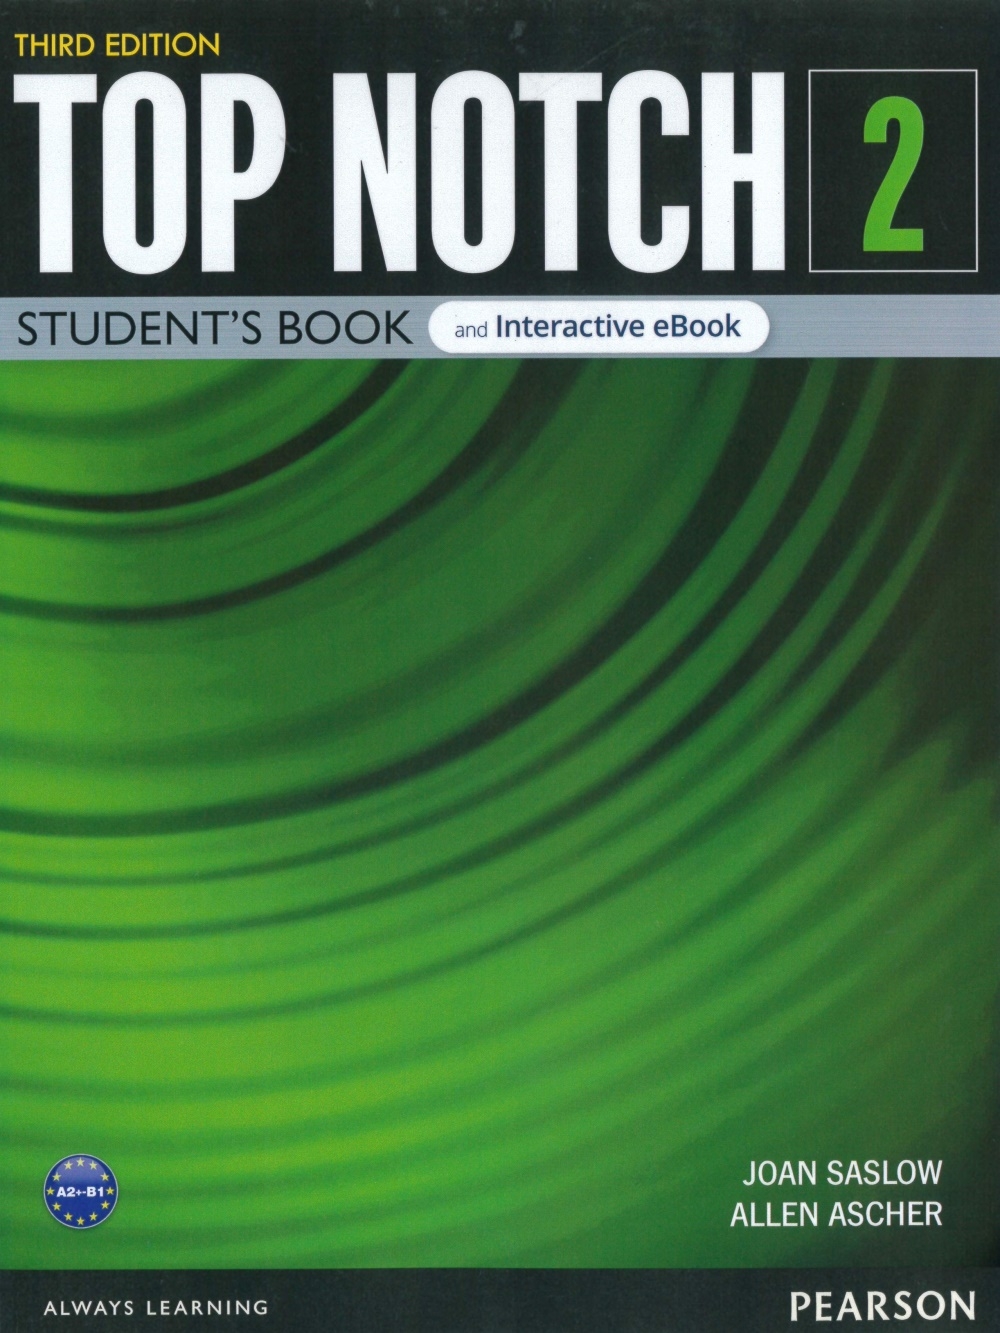 Top Notch 3/e (2) Student’s Book and Interactive eBook with Digital Resources & App